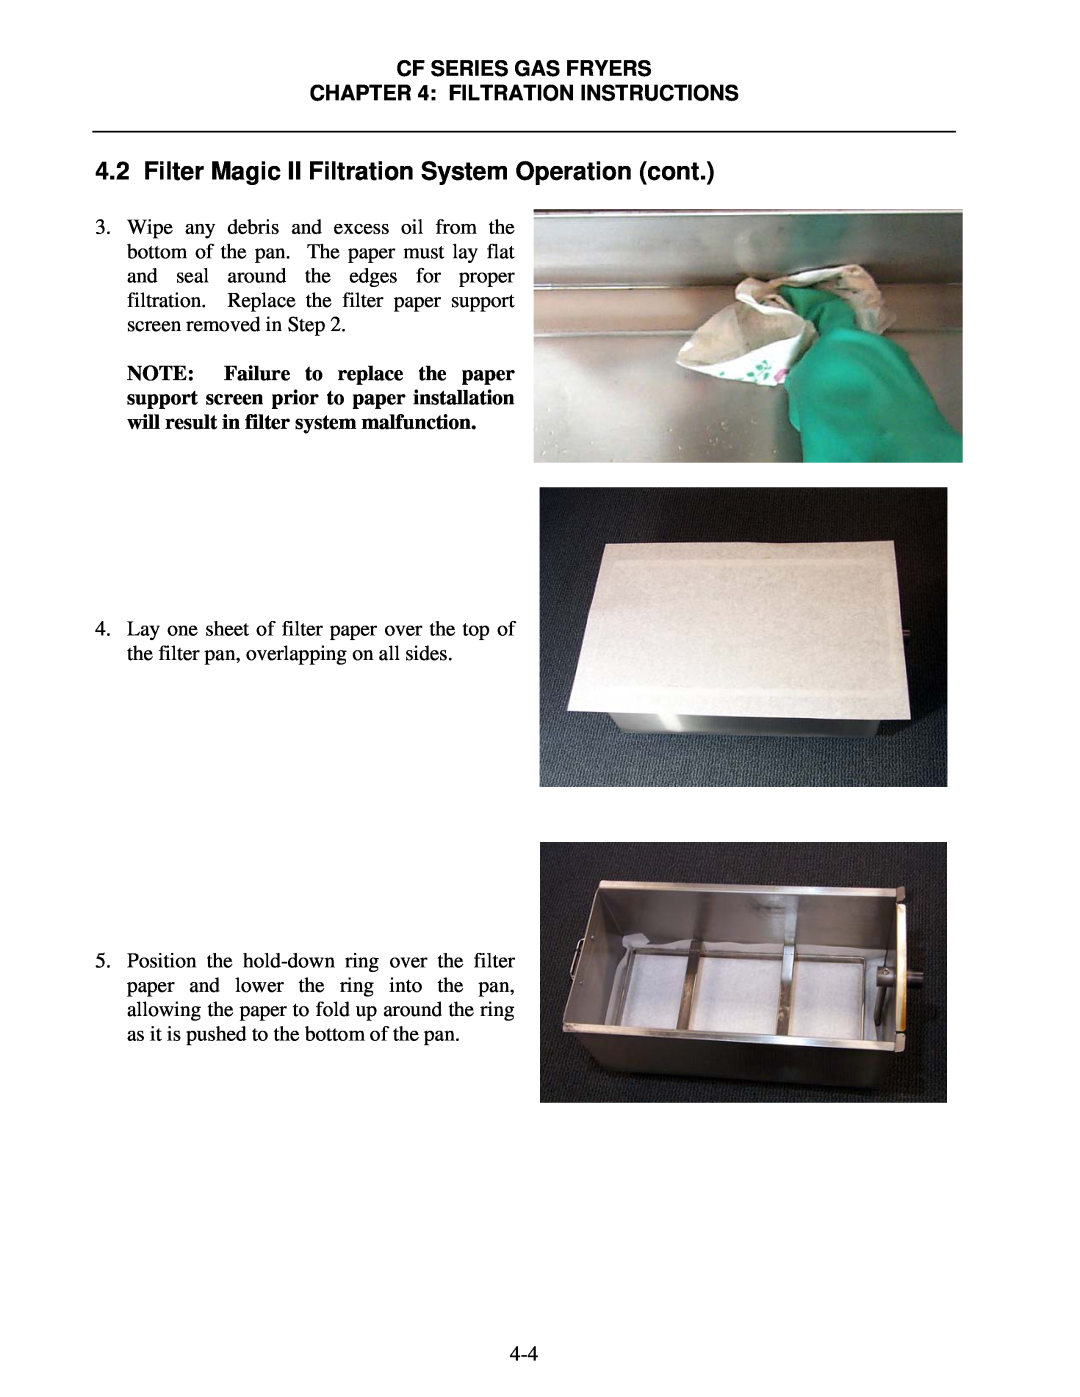 Frymaster FMCF operation manual Filter Magic II Filtration System Operation cont 